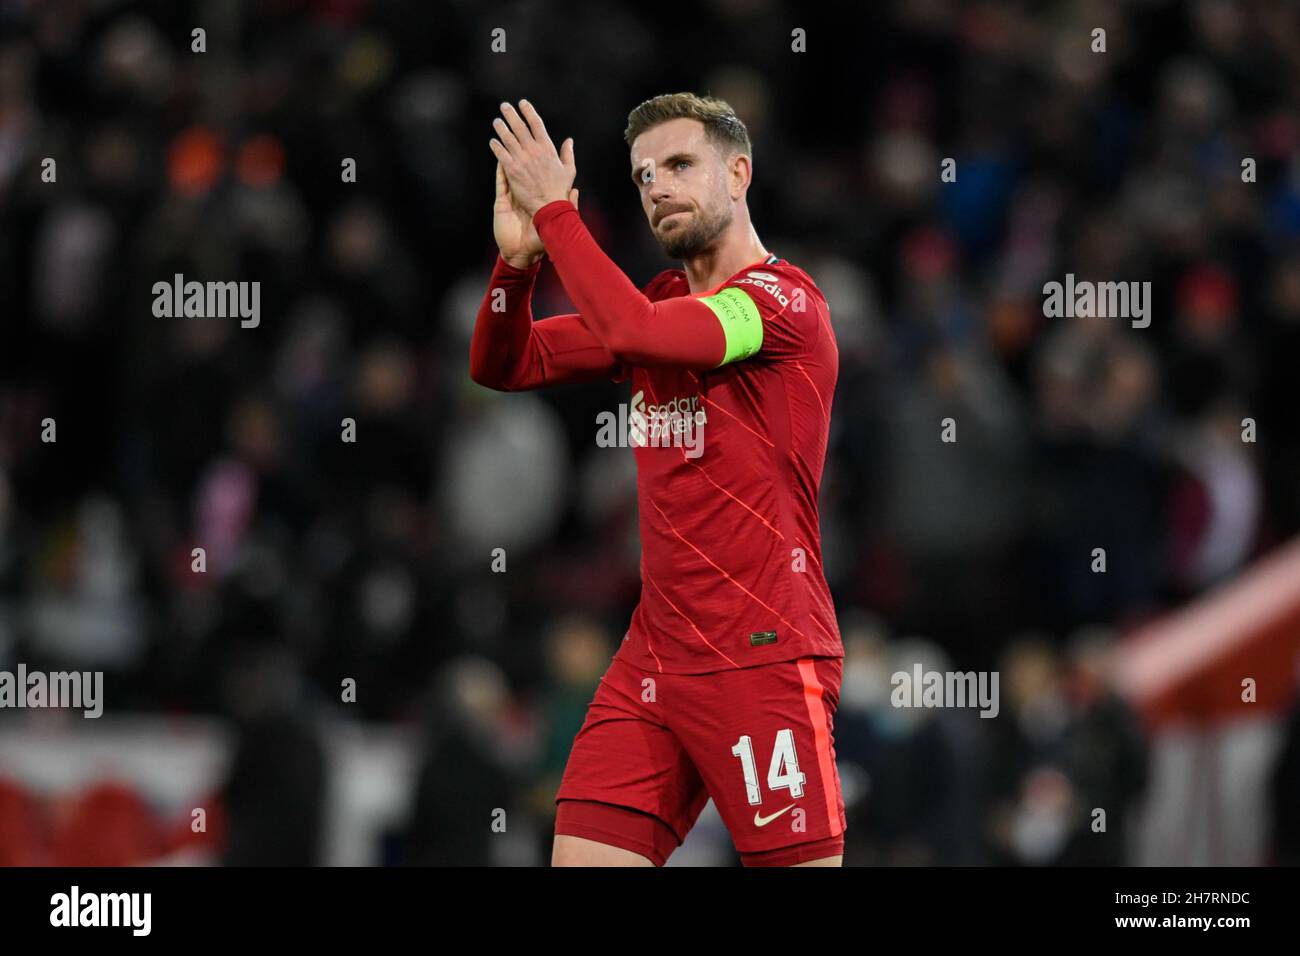 Liverpool, UK. 24th Nov, 2021. Jordan Henderson #14 of Liverpool applauds the home supporters at the end of the game after his side beat FC Porto 2-0 in Liverpool, United Kingdom on 11/24/2021. (Photo by Simon Whitehead/News Images/Sipa USA) Credit: Sipa USA/Alamy Live News Stock Photo